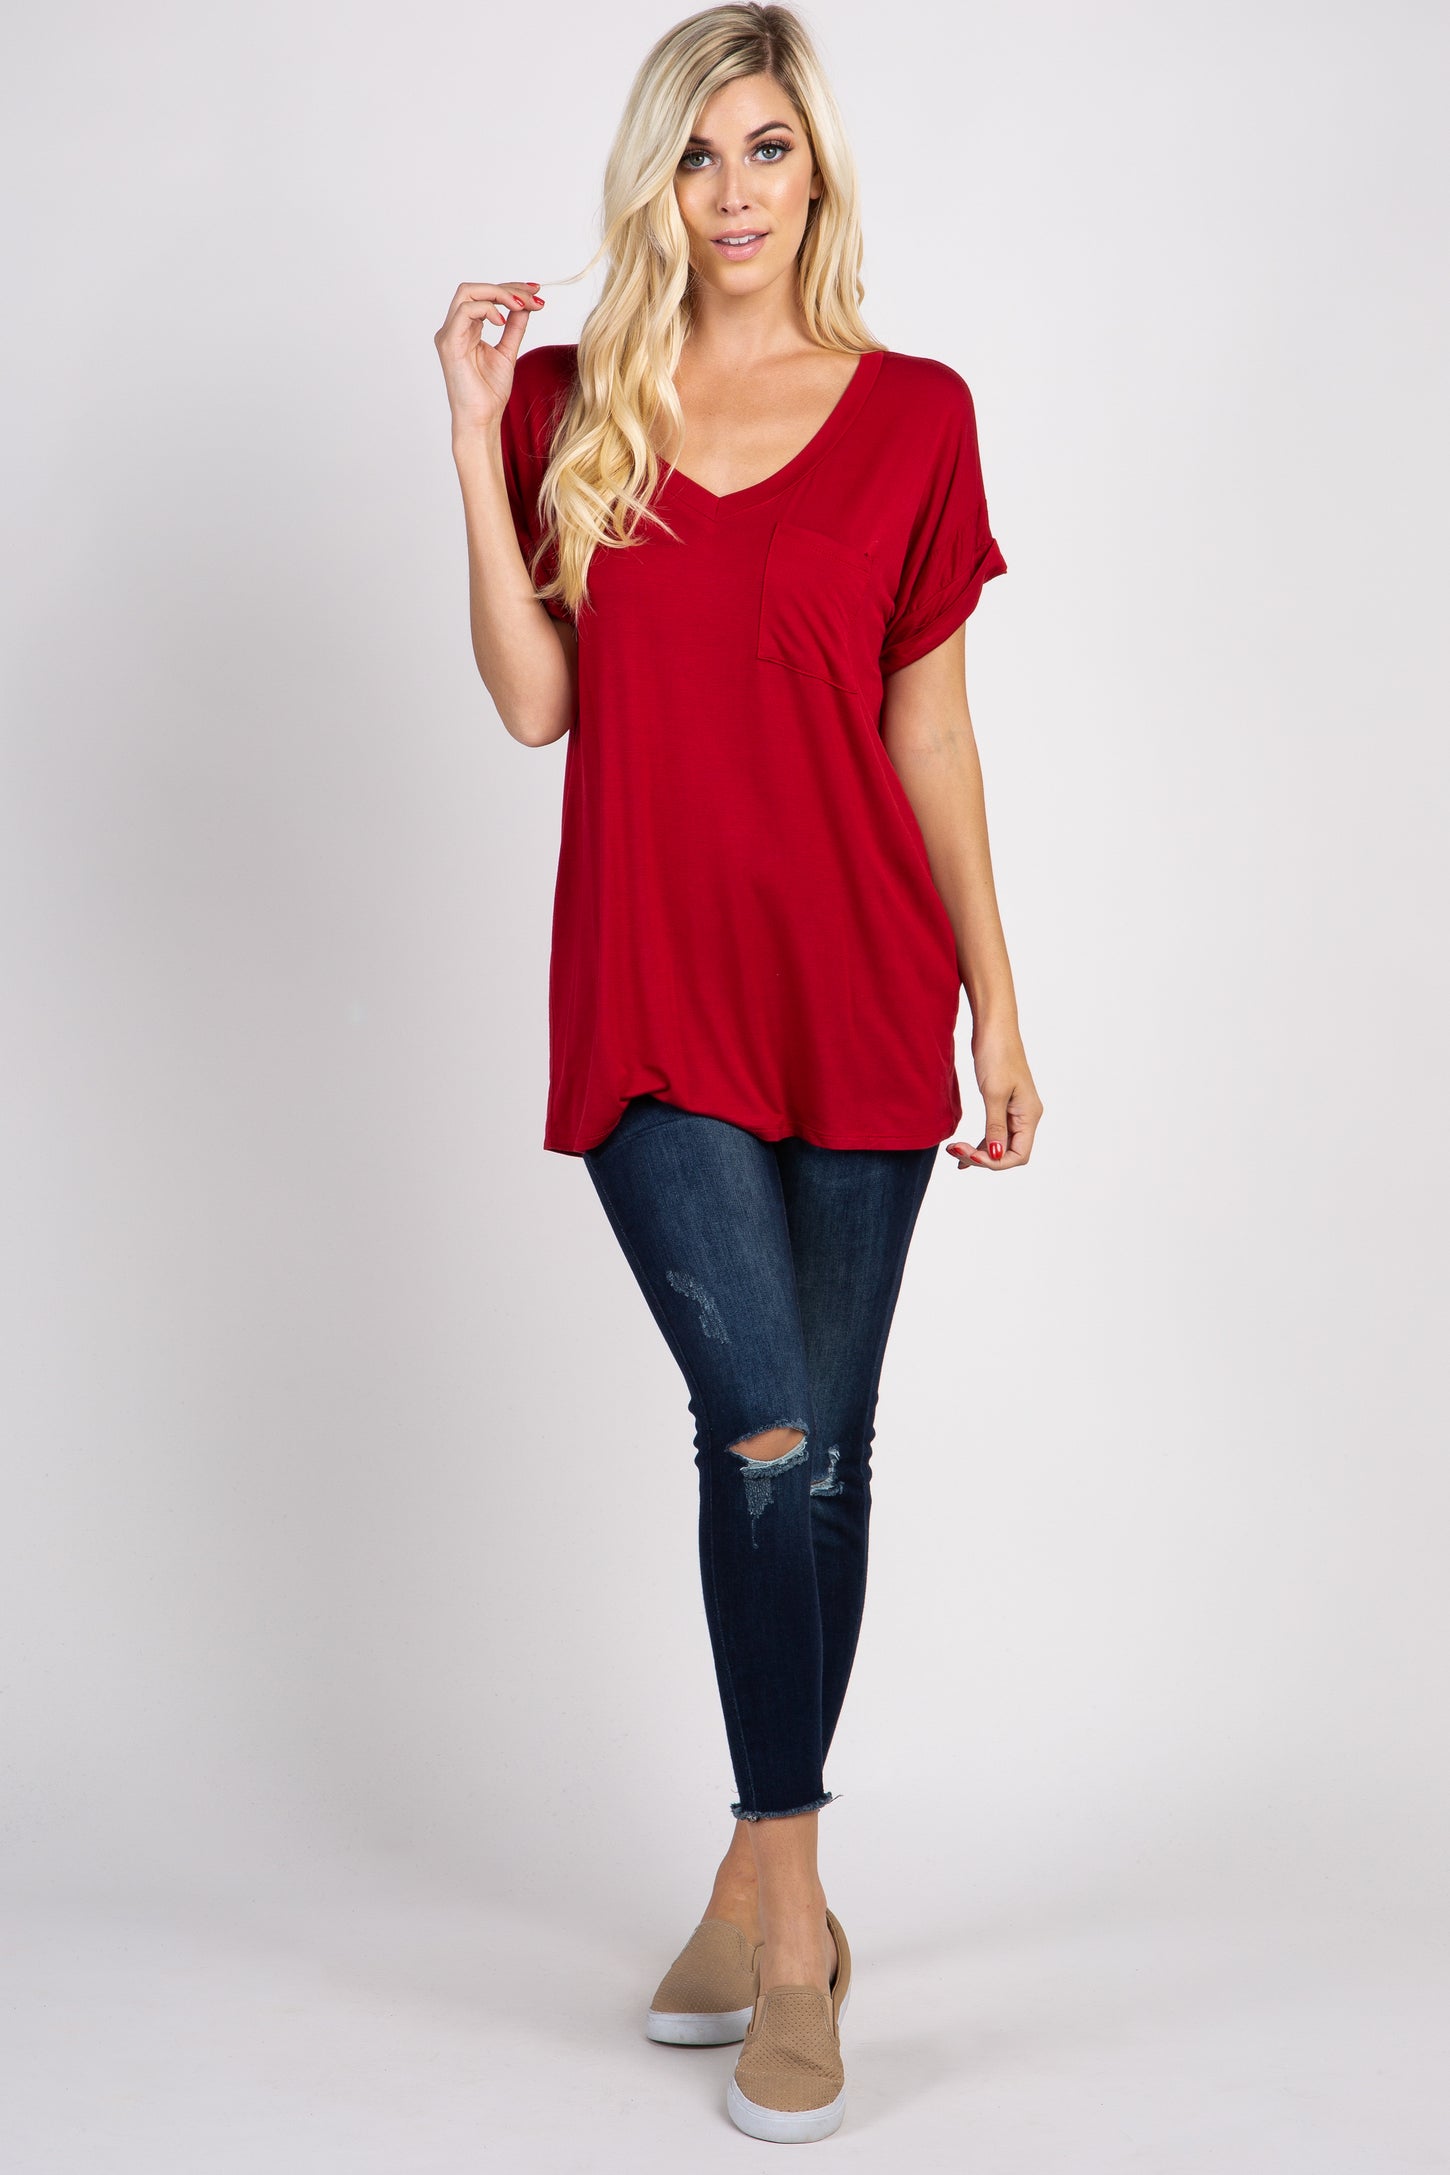 Red Solid Pocket Front Top